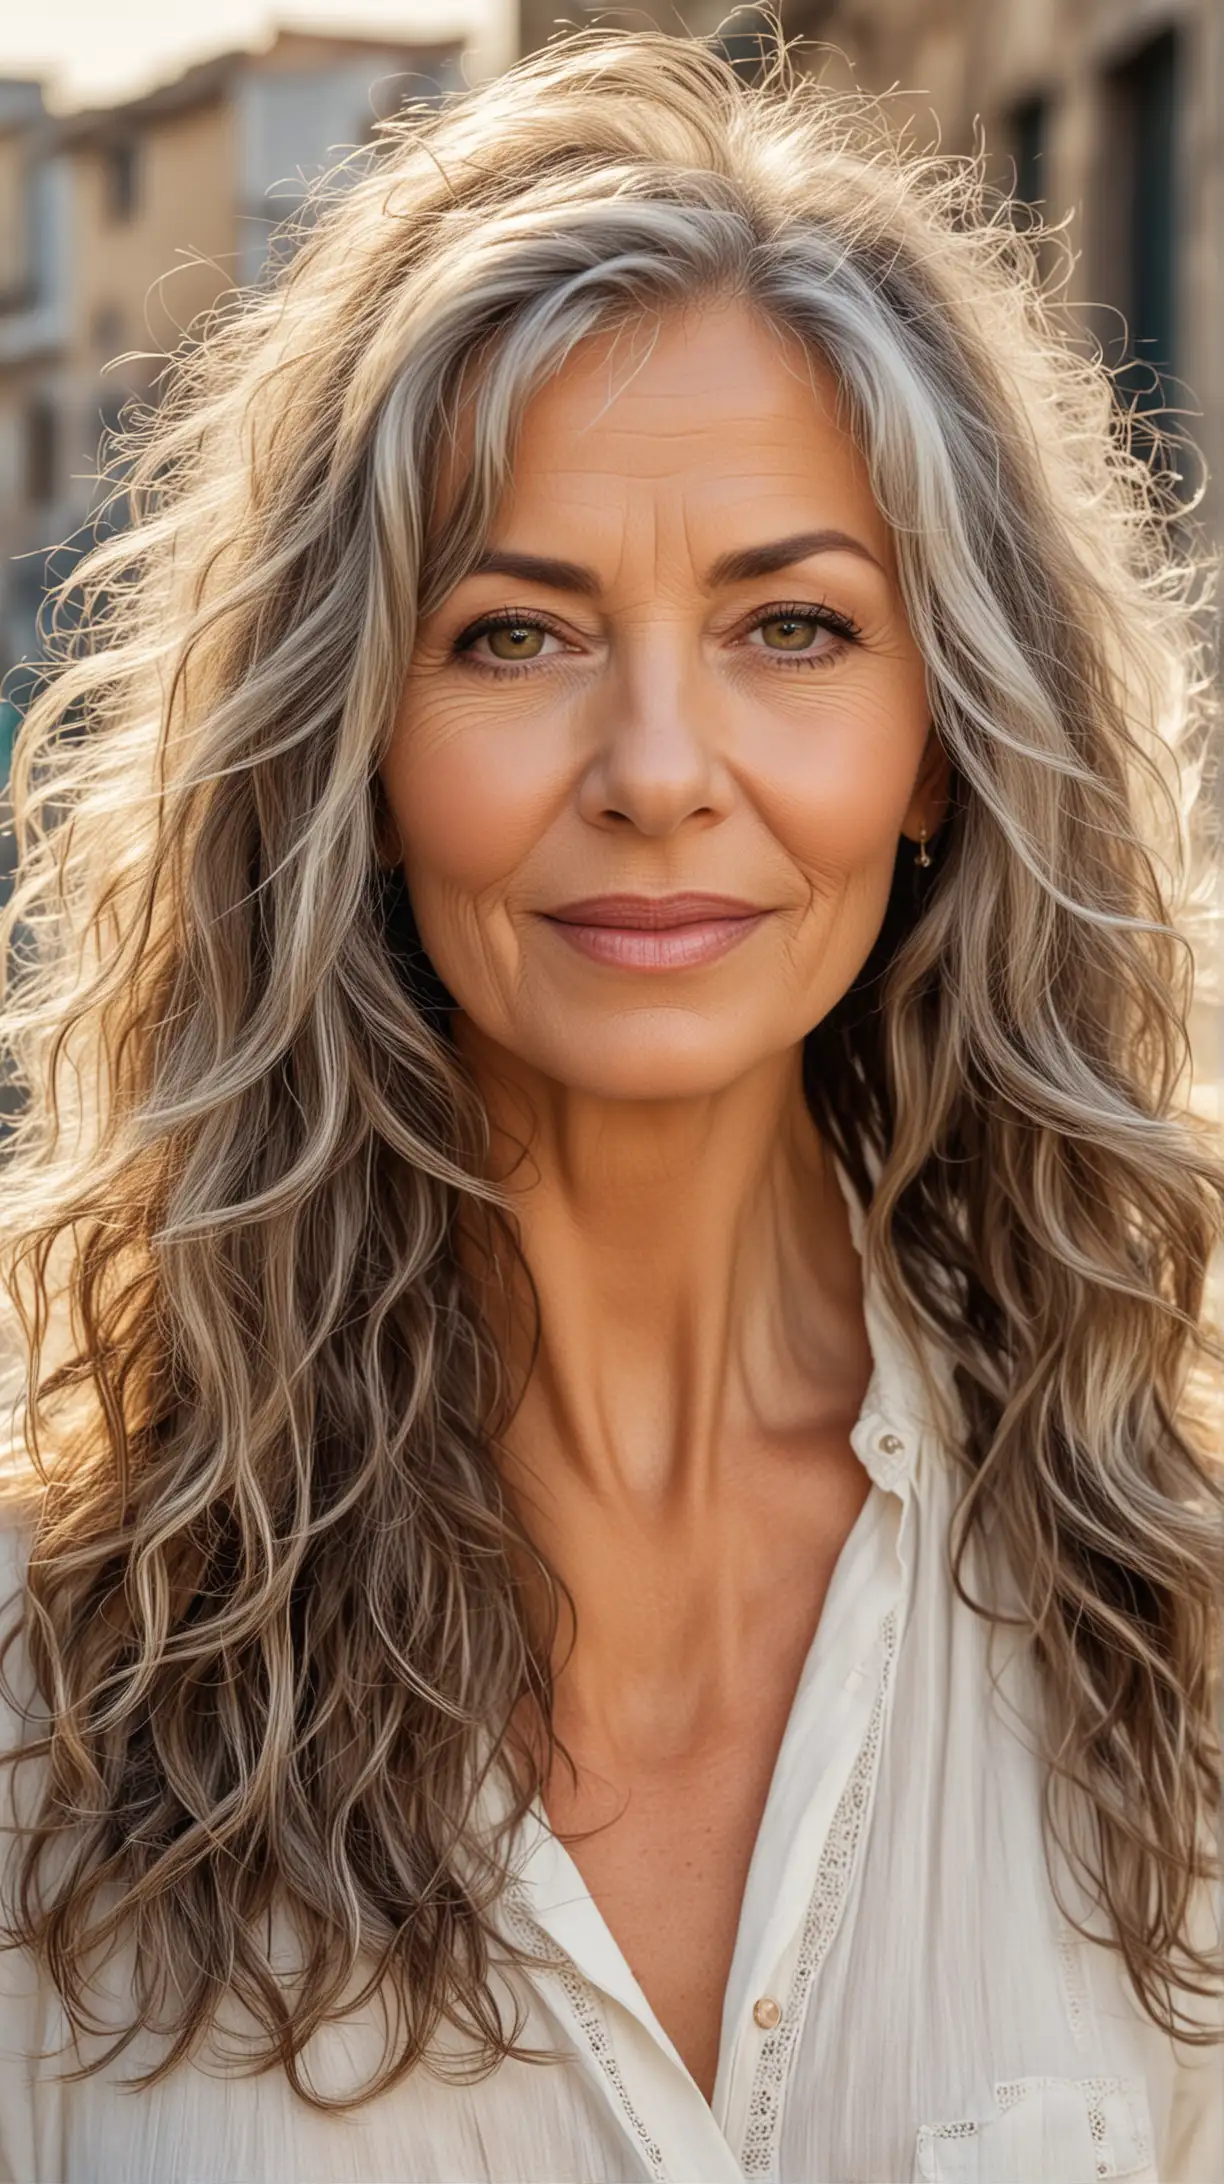 Beautiful woman of model appearance, over 60 years old, haircut - Bohemian Long with Beach Waves, oval and face, background - urban